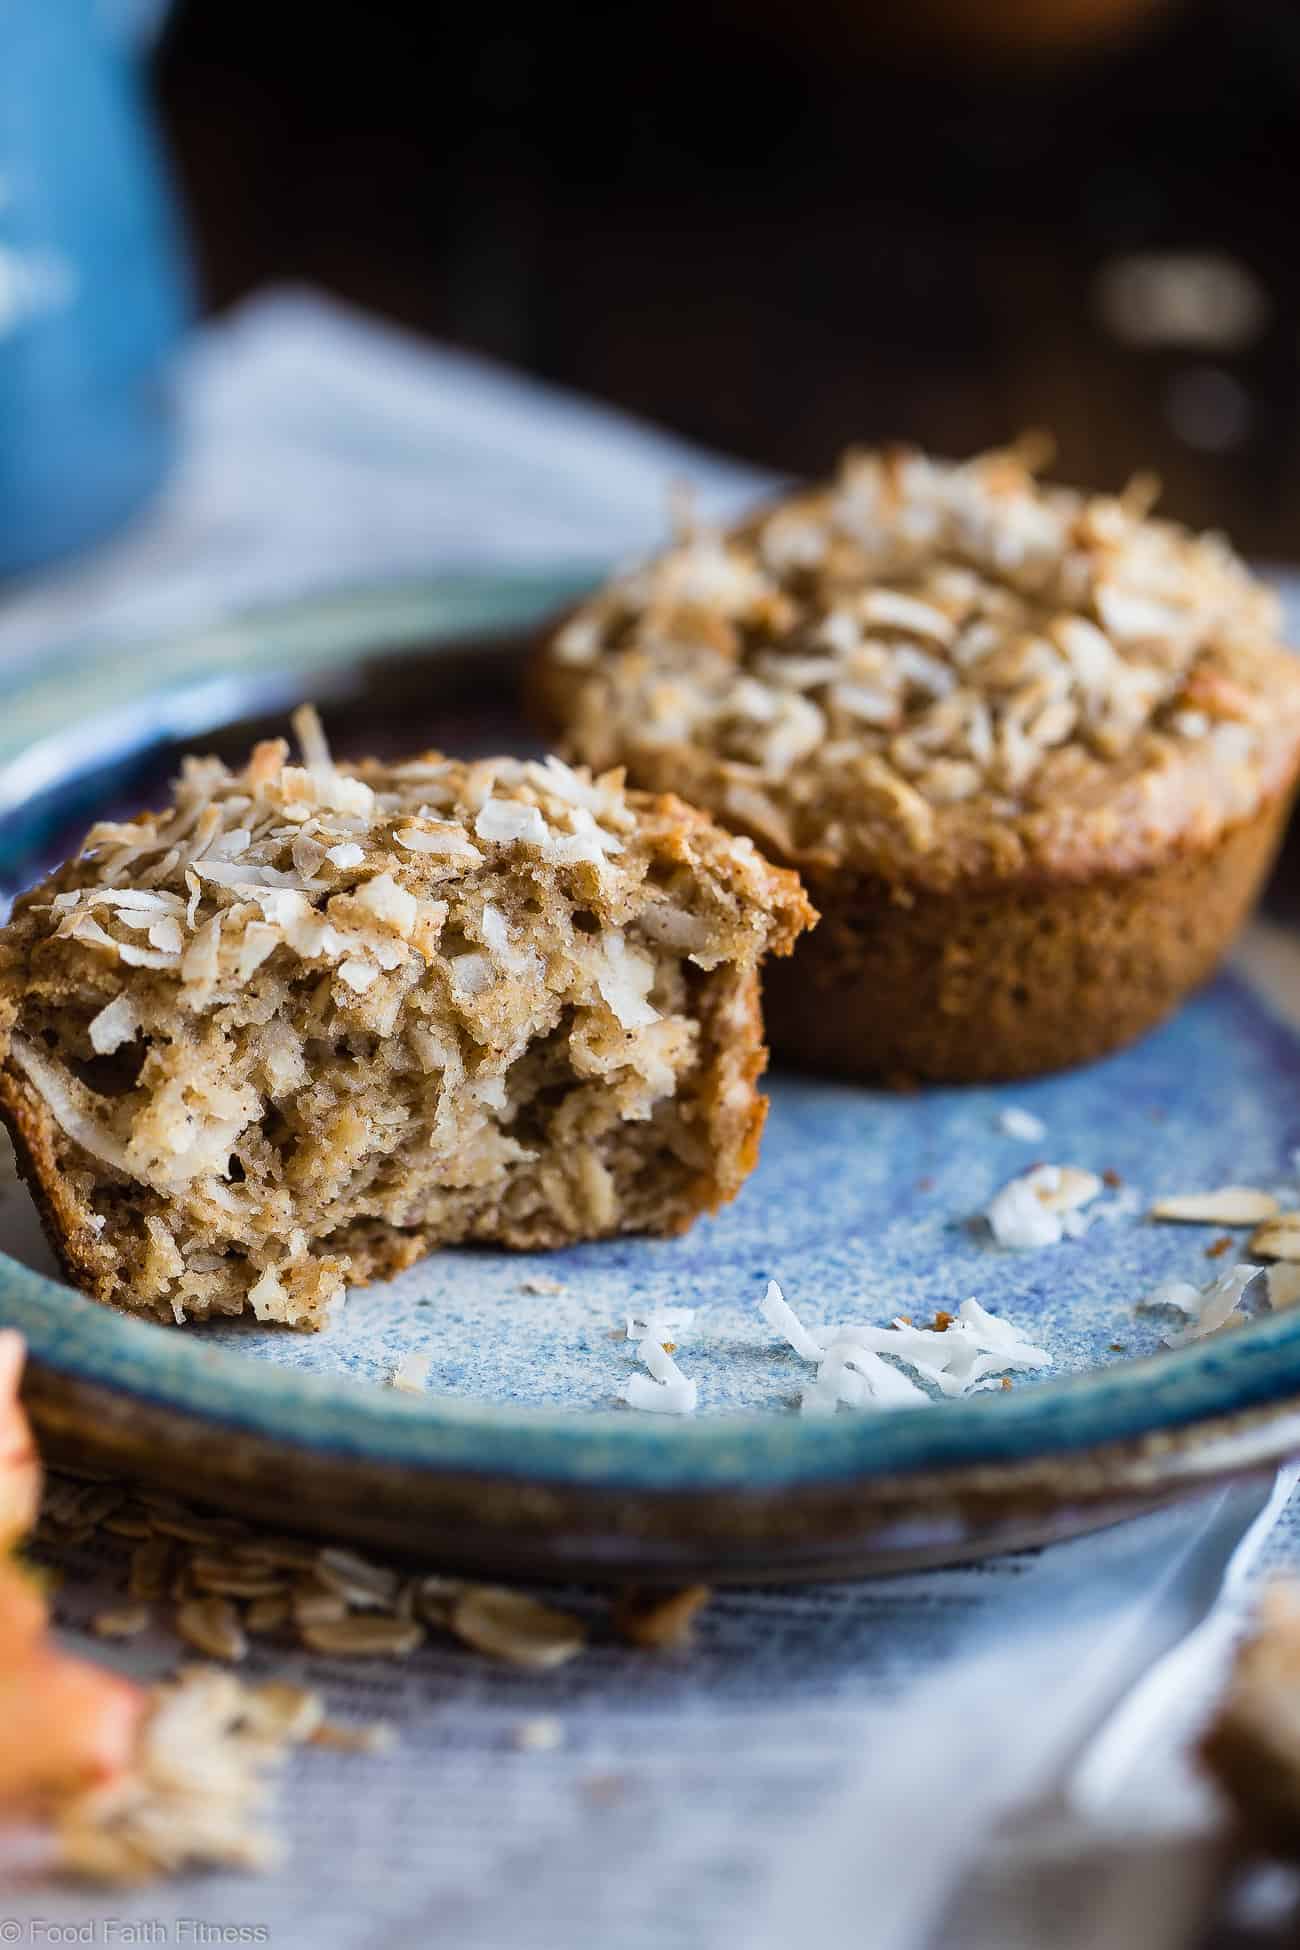 Gluten Free Coconut Almond Butter Oatmeal Muffins - These healthy, dairy free muffins are made with simple, wholesome ingredients like oatmeal and almond butter and topped with coconut! They use applesauce instead of oil to keep them SO moist! | #Foodfaithfitness | #Glutenfree #Healthy #Almondbutter #Coconut #Muffins